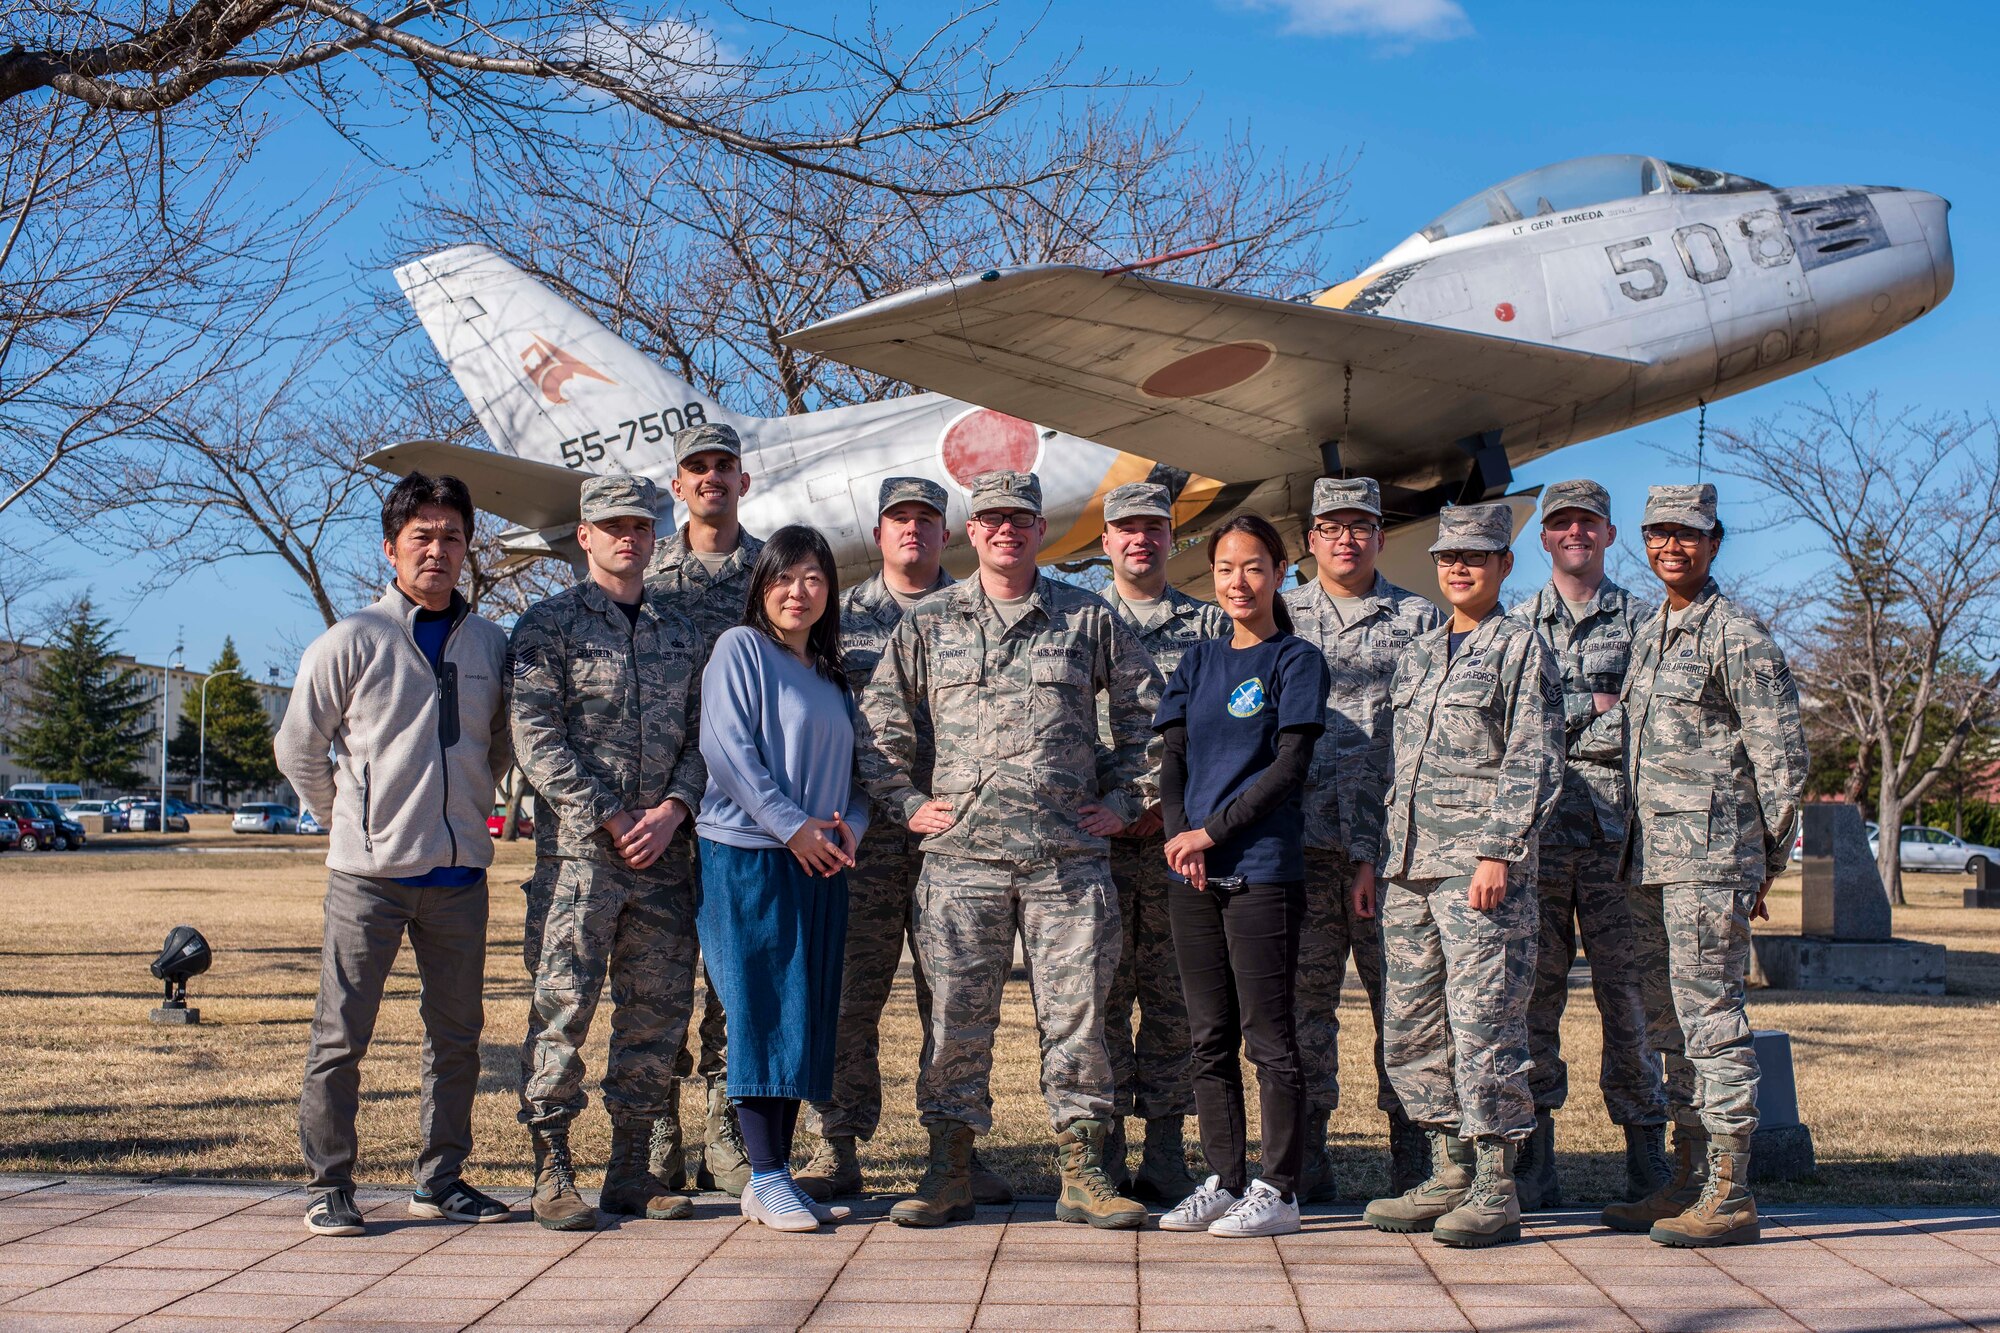 Members of the 35th Comptroller Squadron pose for a photo at Misawa Air Base, Japan, March 30, 2018. The squadron received the Pacific Air Force level Maj. Alfred K. Flowers Comptroller Organization of the Year award and the Financial Operations Flight won the Air Force level Financial Services Office of the Year award which recognizes financial managers who set themselves apart by demonstrating exemplary performance and service excellence for the Air Force. (U.S. Air Force photo by Airman 1st Class Collette Brooks)